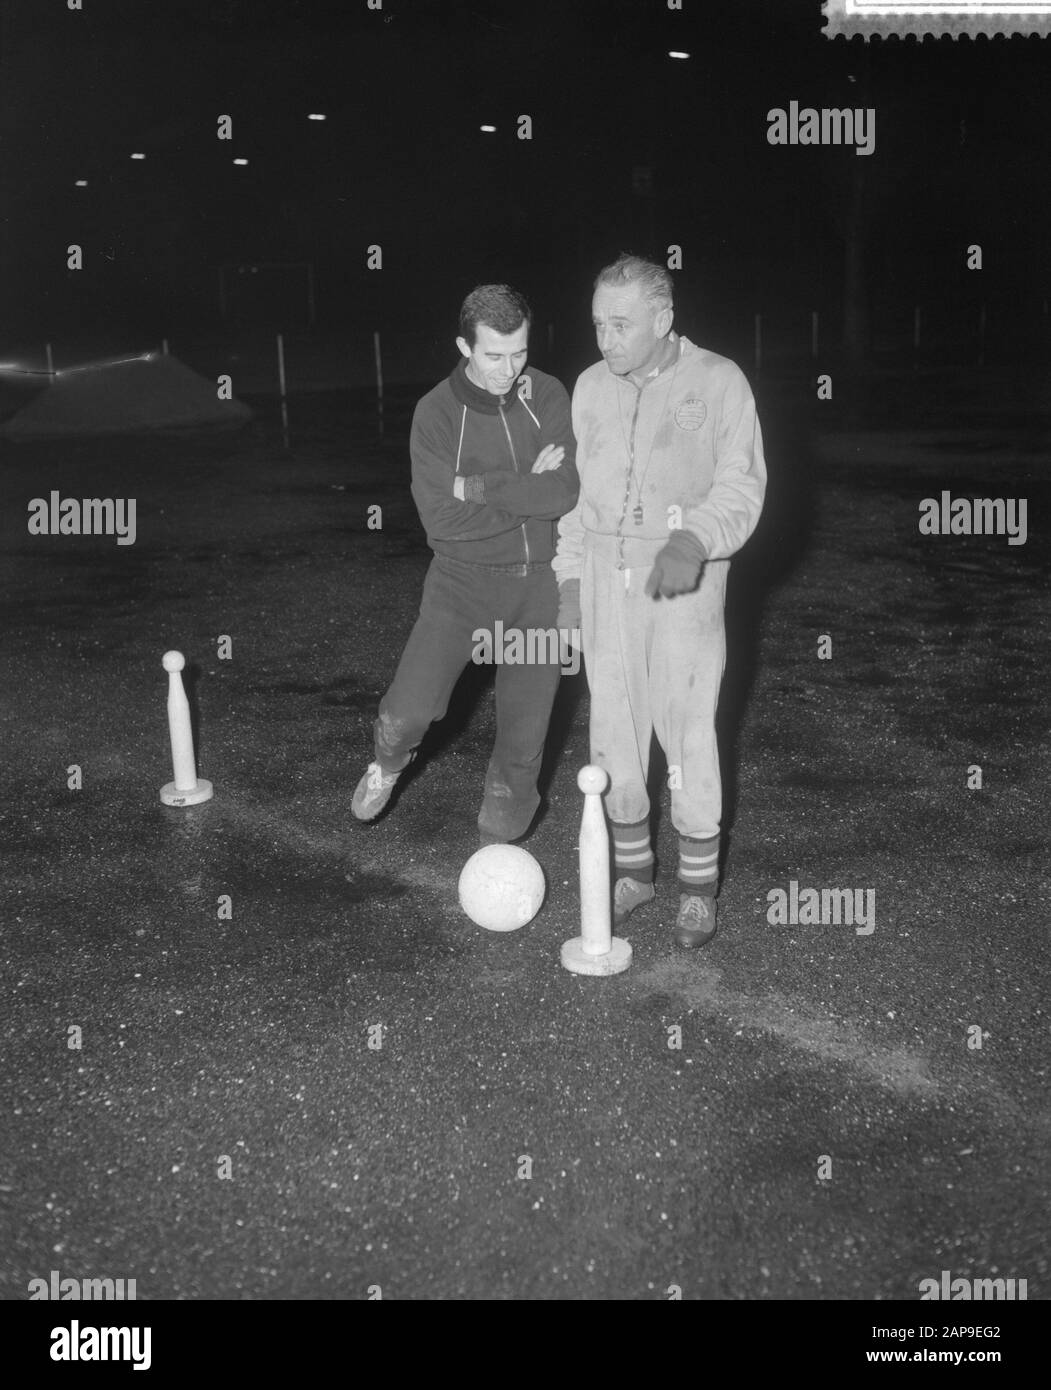 Coen Moulijn with trainer George Sobotka Date: 6 January 1961 Keywords: sport, football Person name: Moulijn, Coen, Sobotka, George Stock Photo